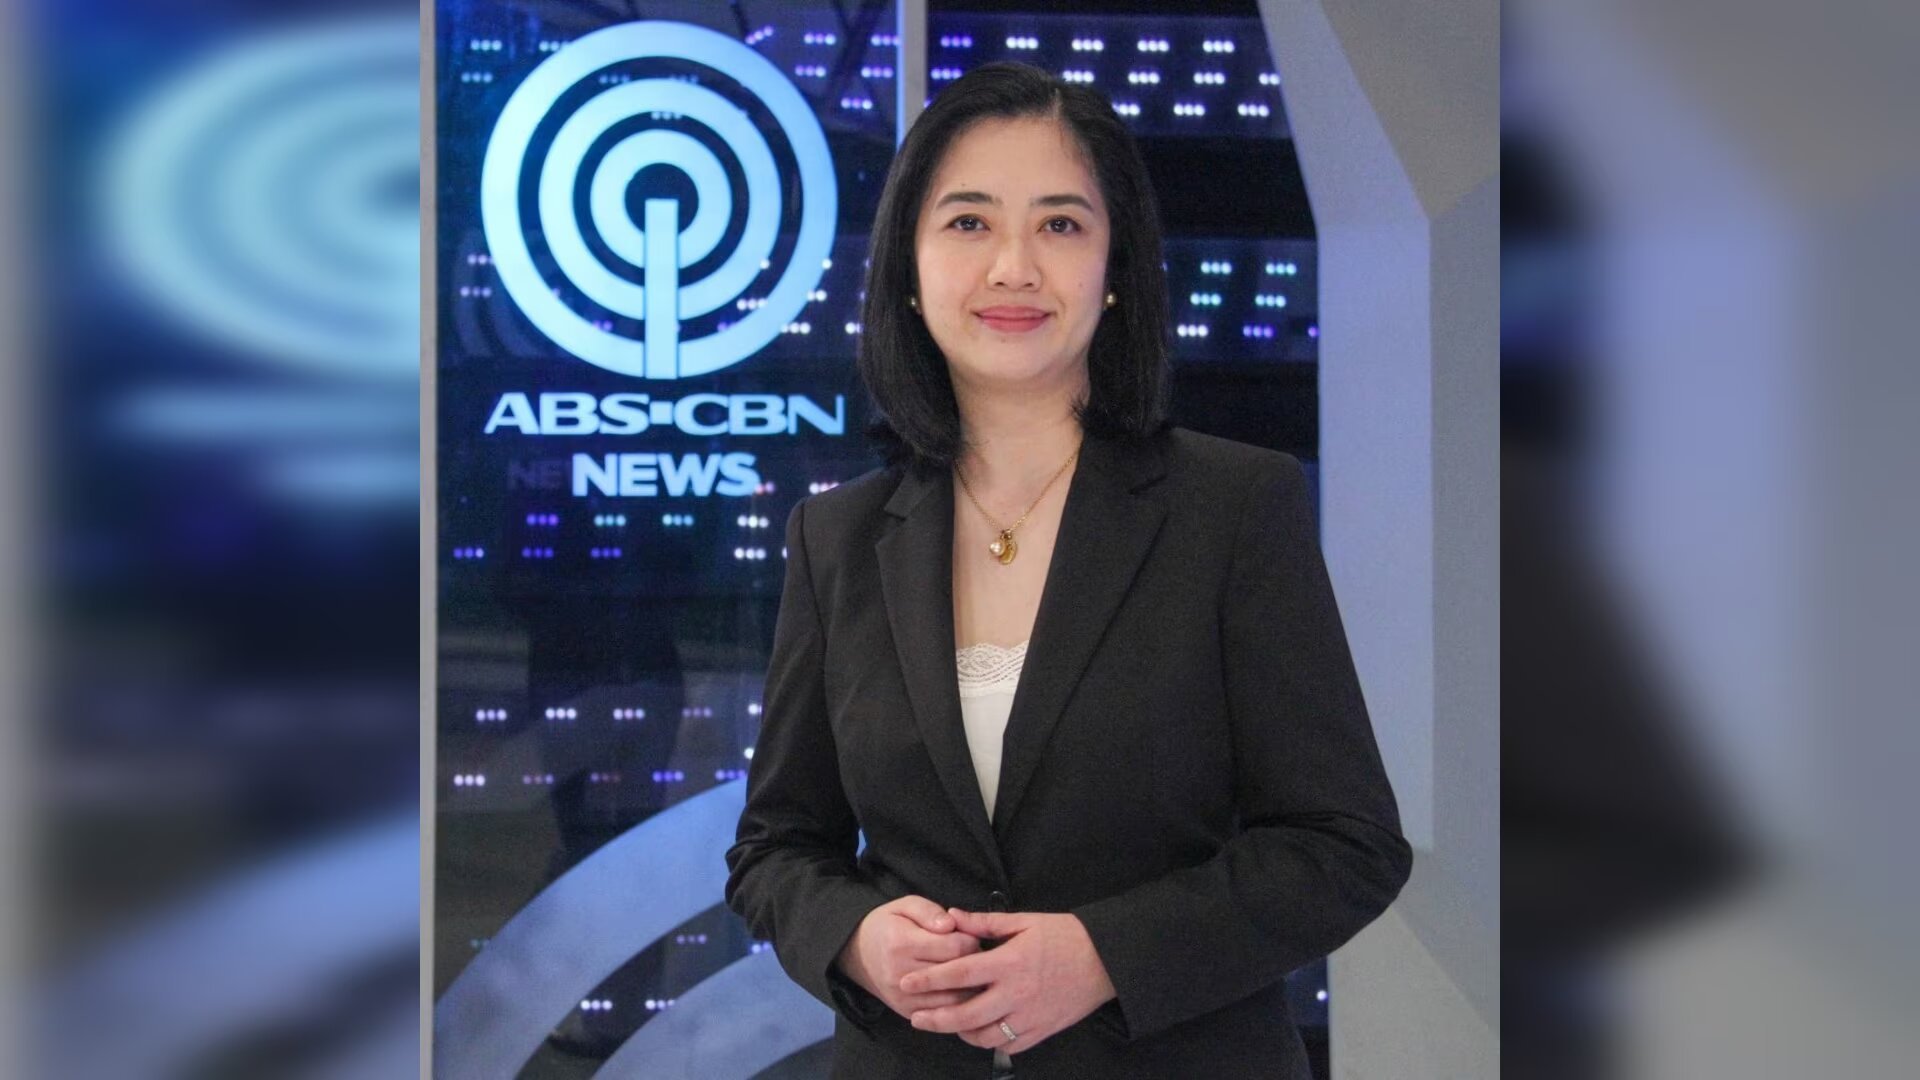 Francis Toral named new head of ABS-CBN News – UP Alumni Website